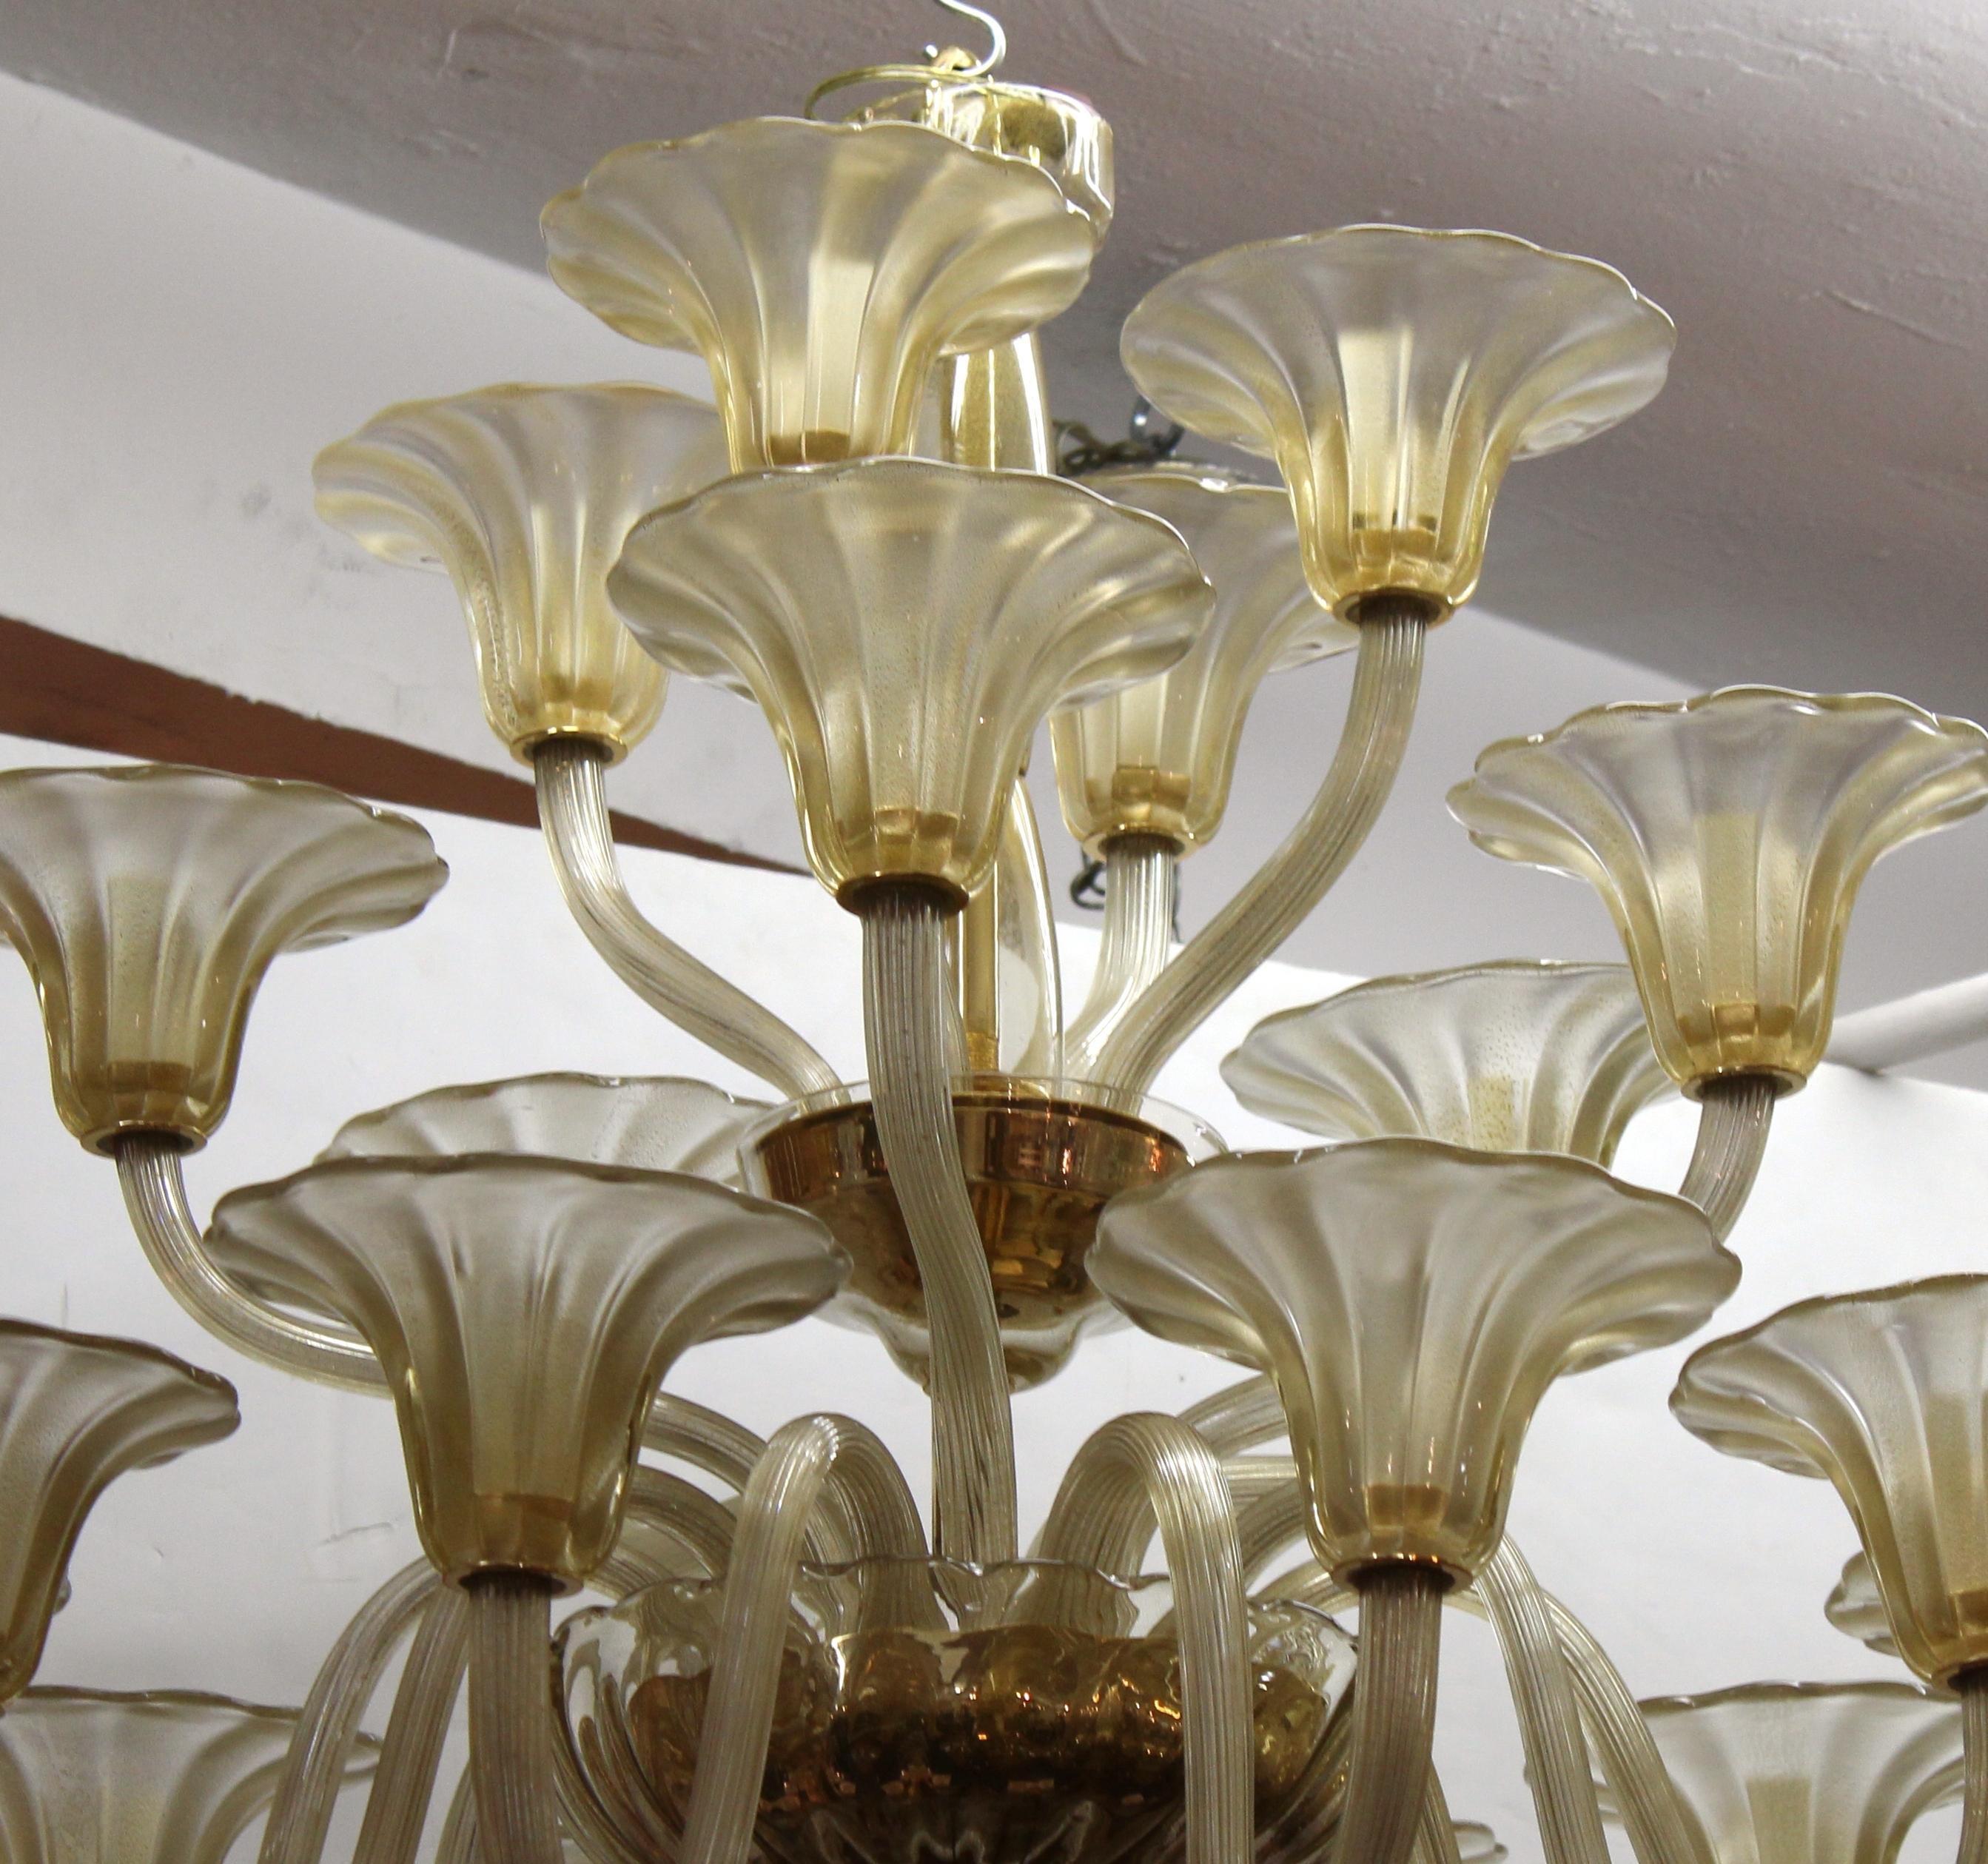 Hollywood Regency Italian Murano glass three-tiered chandelier with elaborate glass designs reminiscent of vegetation and flowers. The item was made in Italy in the mid-20th century and is in great vintage condition.